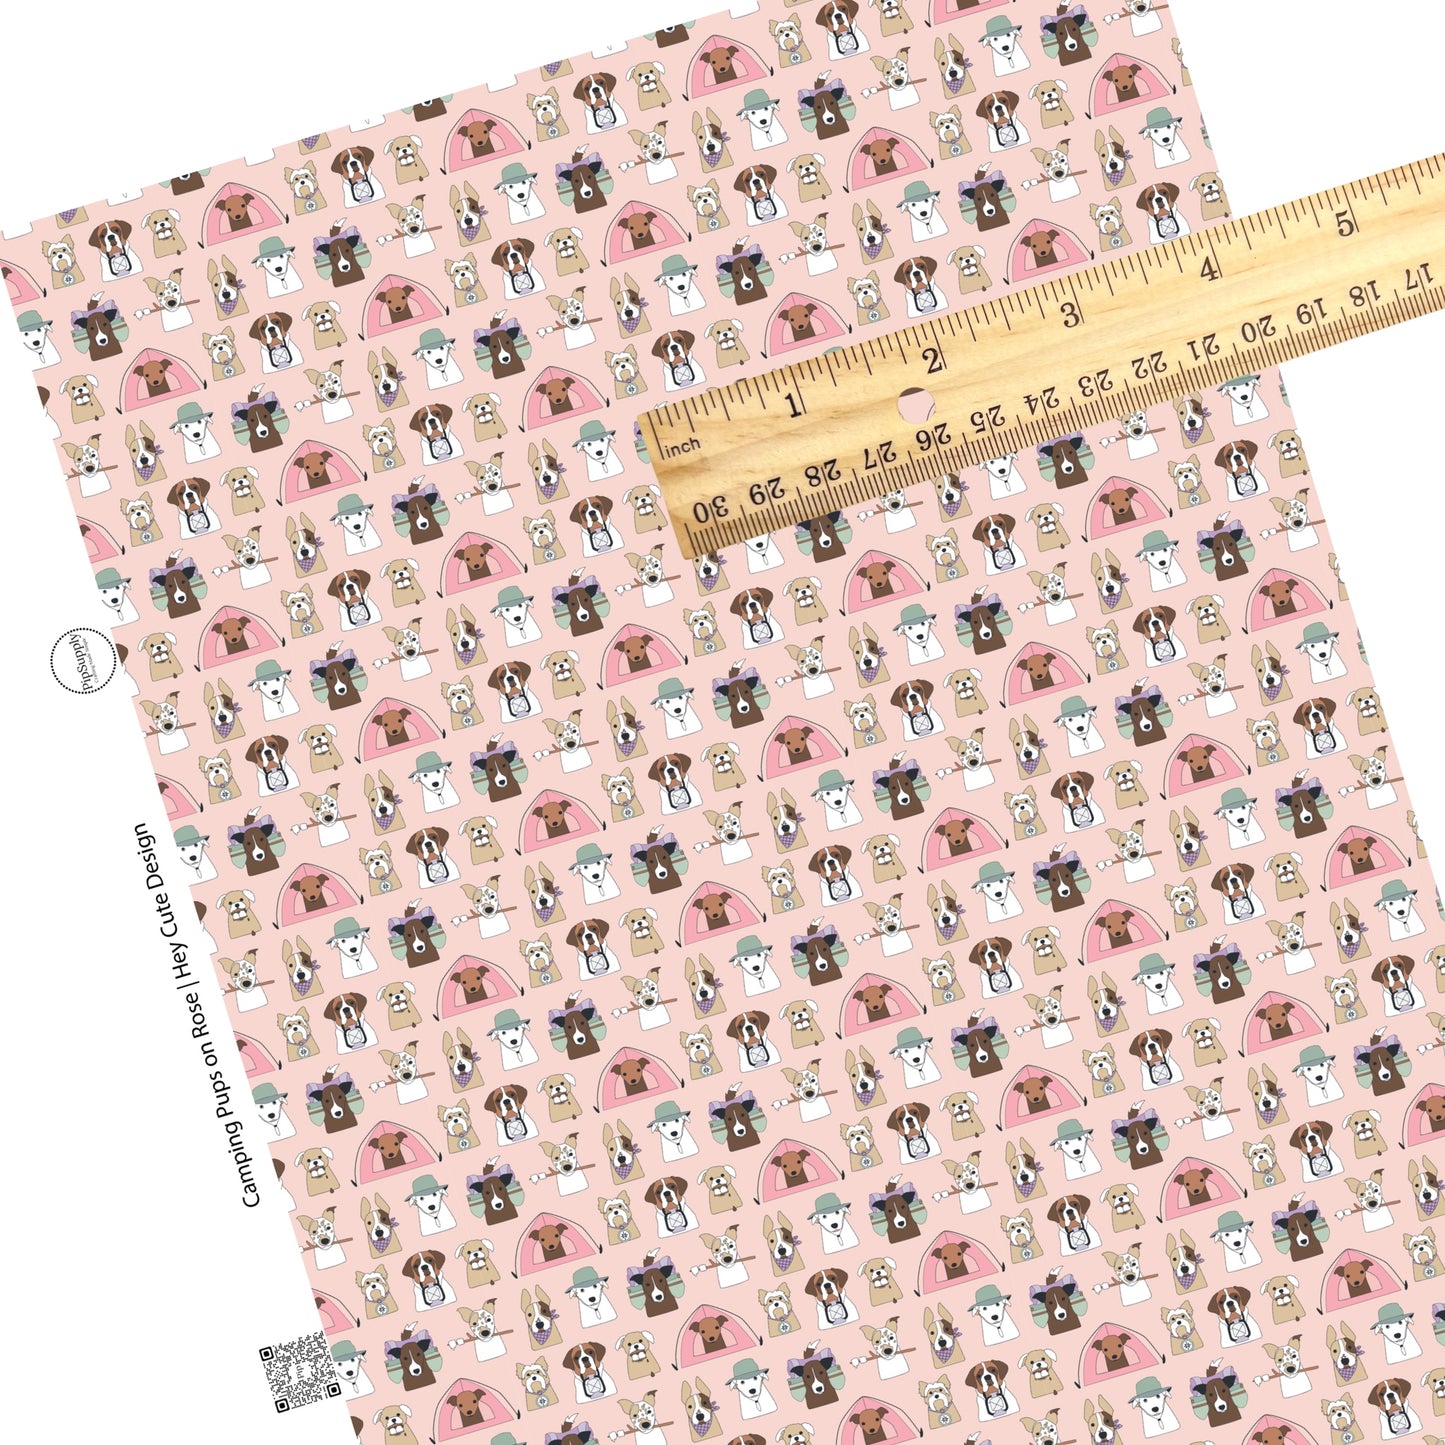 These camping dog outdoor light pink faux leather sheets contain the following design elements: dog faces with hats, smores, and tents on rose. Our CPSIA compliant faux leather sheets or rolls can be used for all types of crafting projects. 